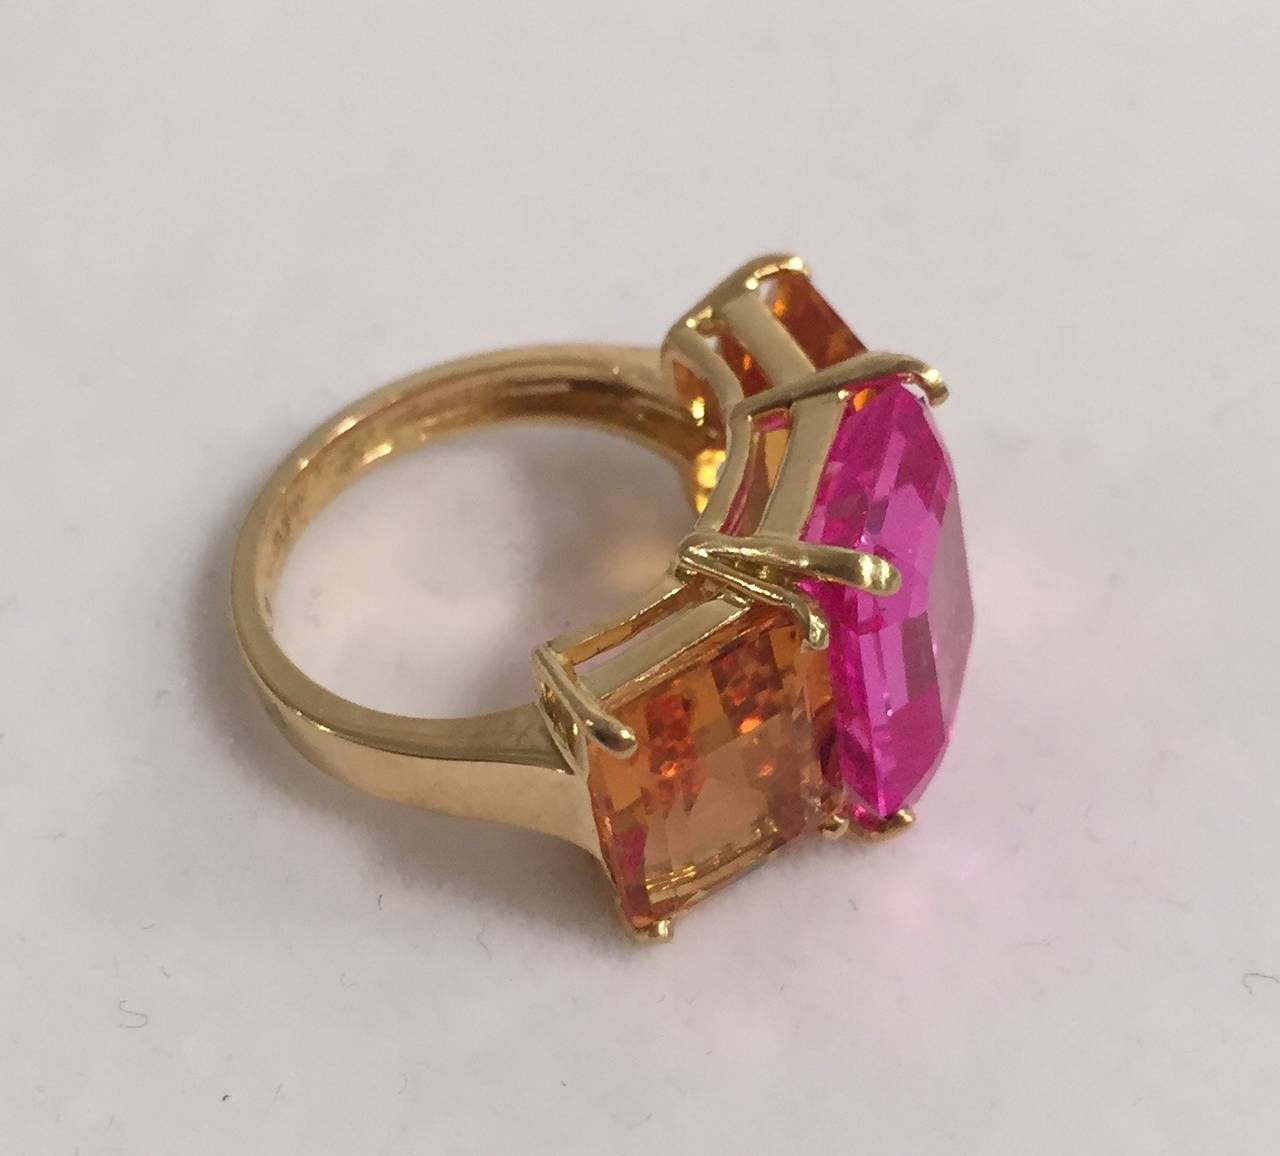 18k Yellow Gold Three Stone Emerald Cut Ring with Citrine and Pink Topaz

Approximately an inch wide and half of an inch tall

The Three Stone Emerald Cut Ring can be made with any stone combination

Please contact us with any inquiries you may